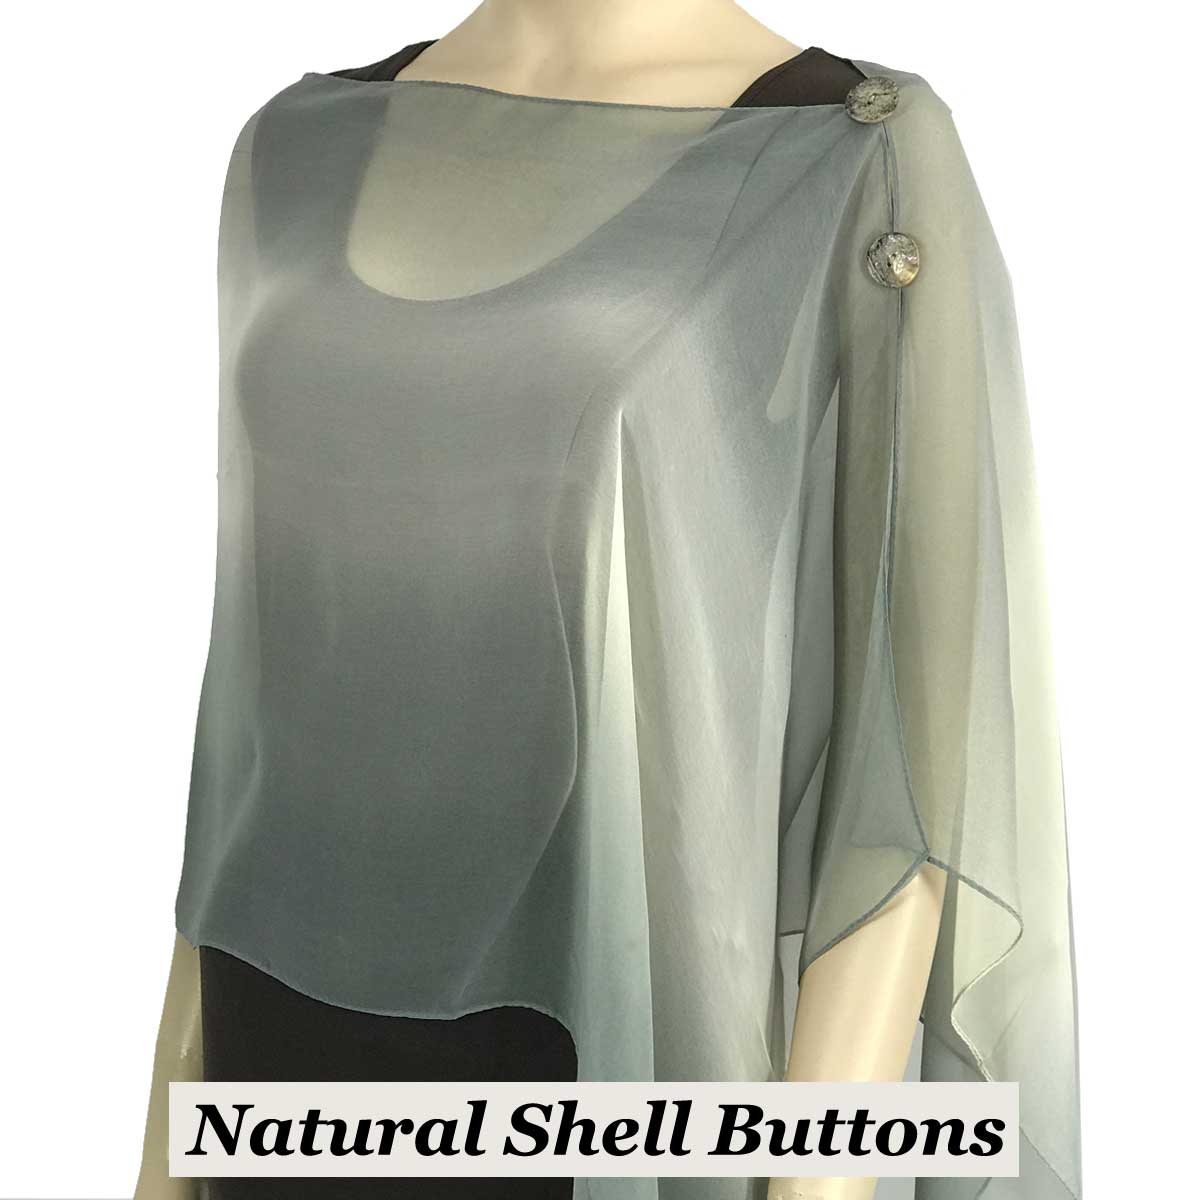 Natural Shell Buttons #106 Charcoal-Beige-Grey (Tri-Color)